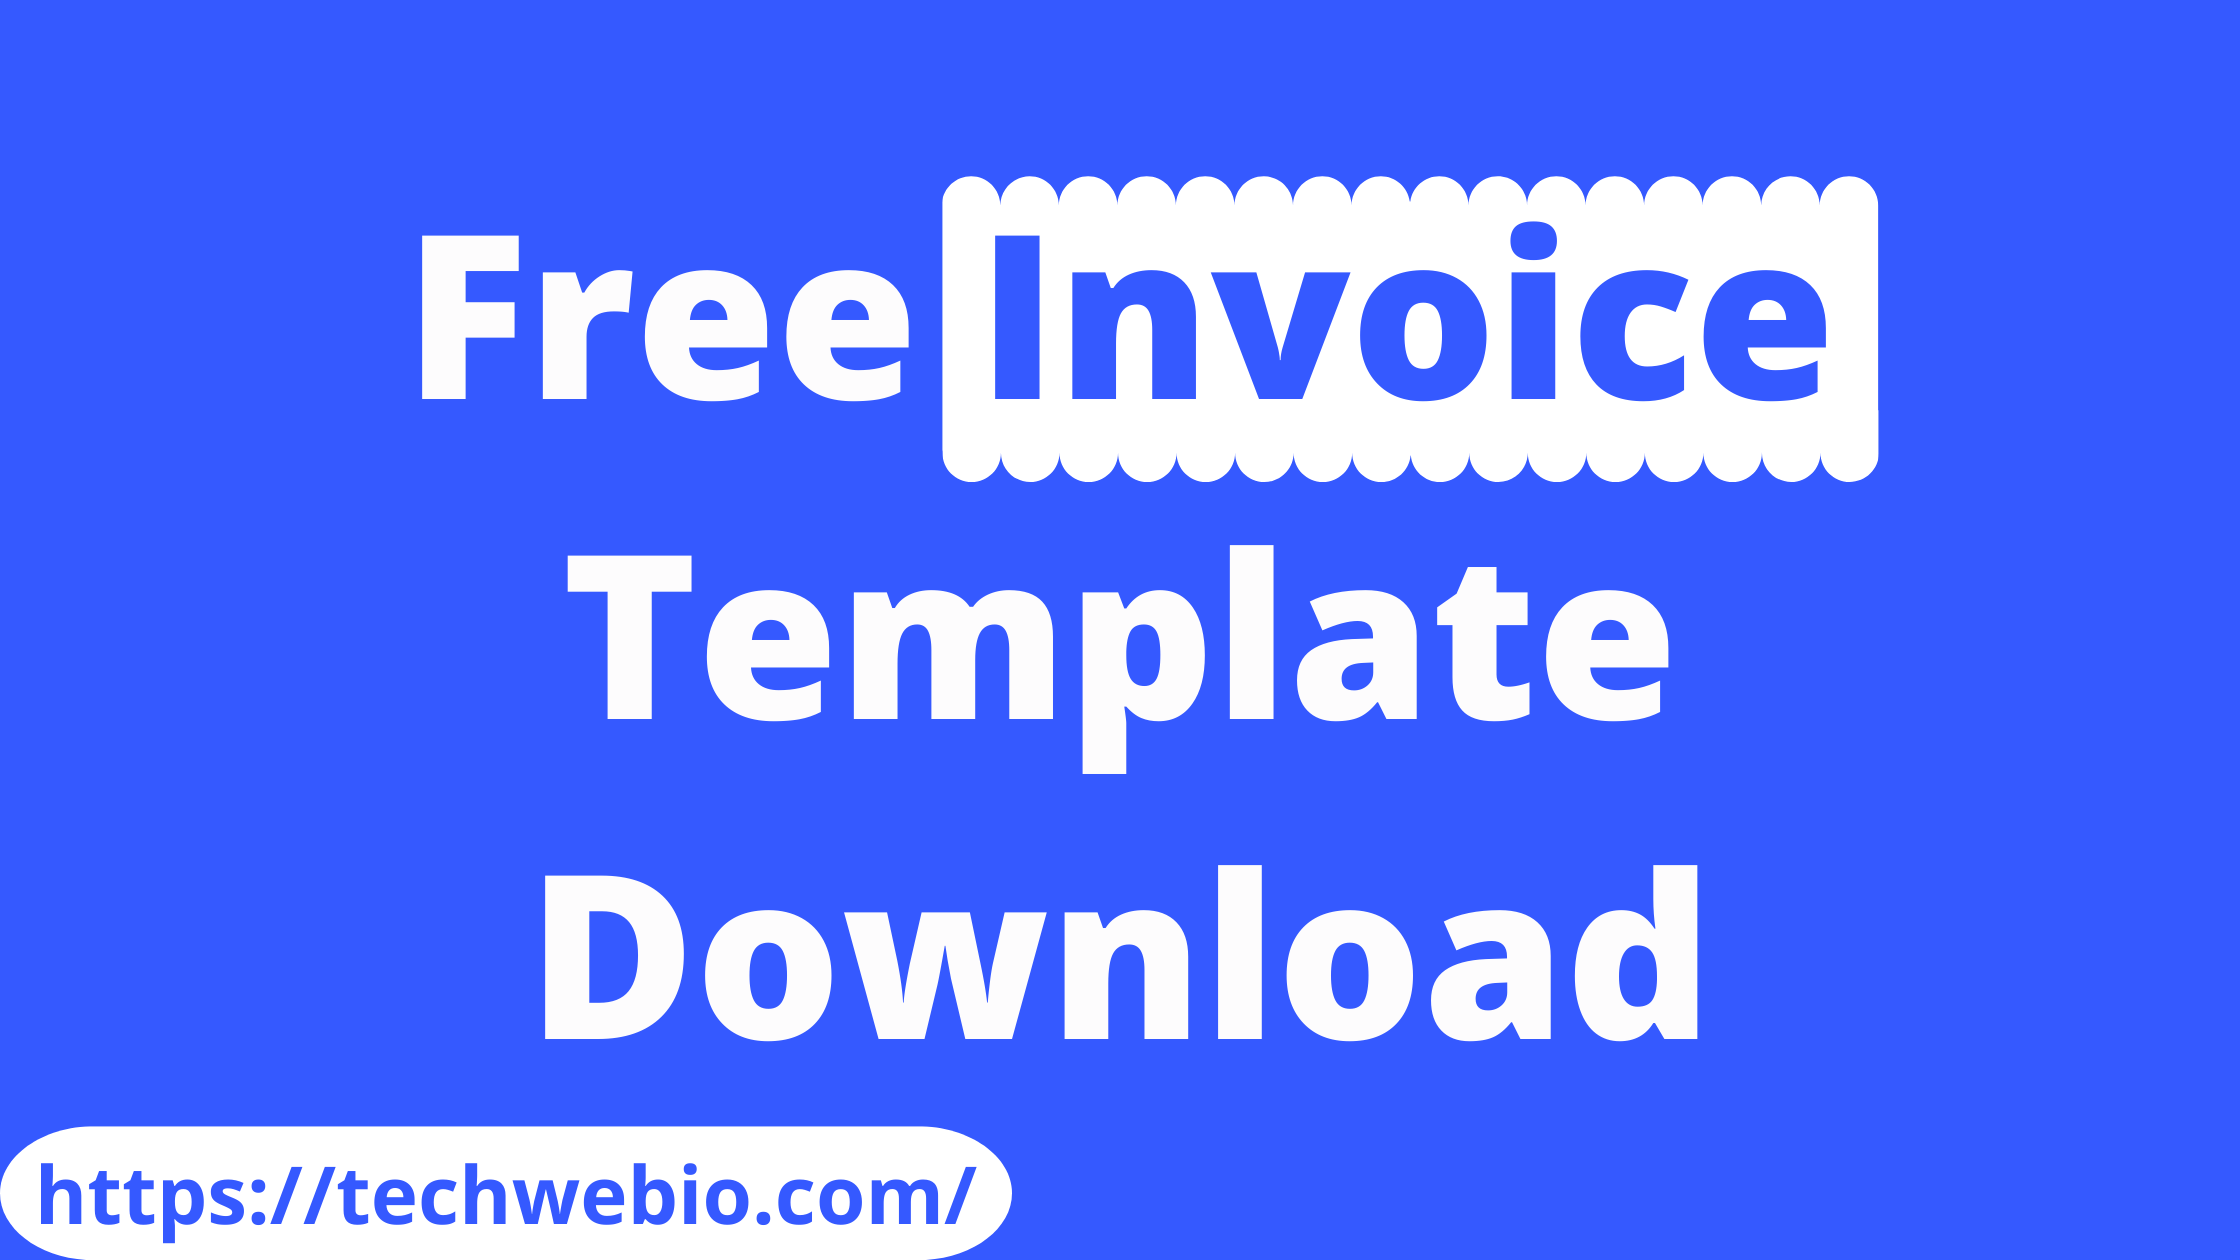 Free Invoice Template Download